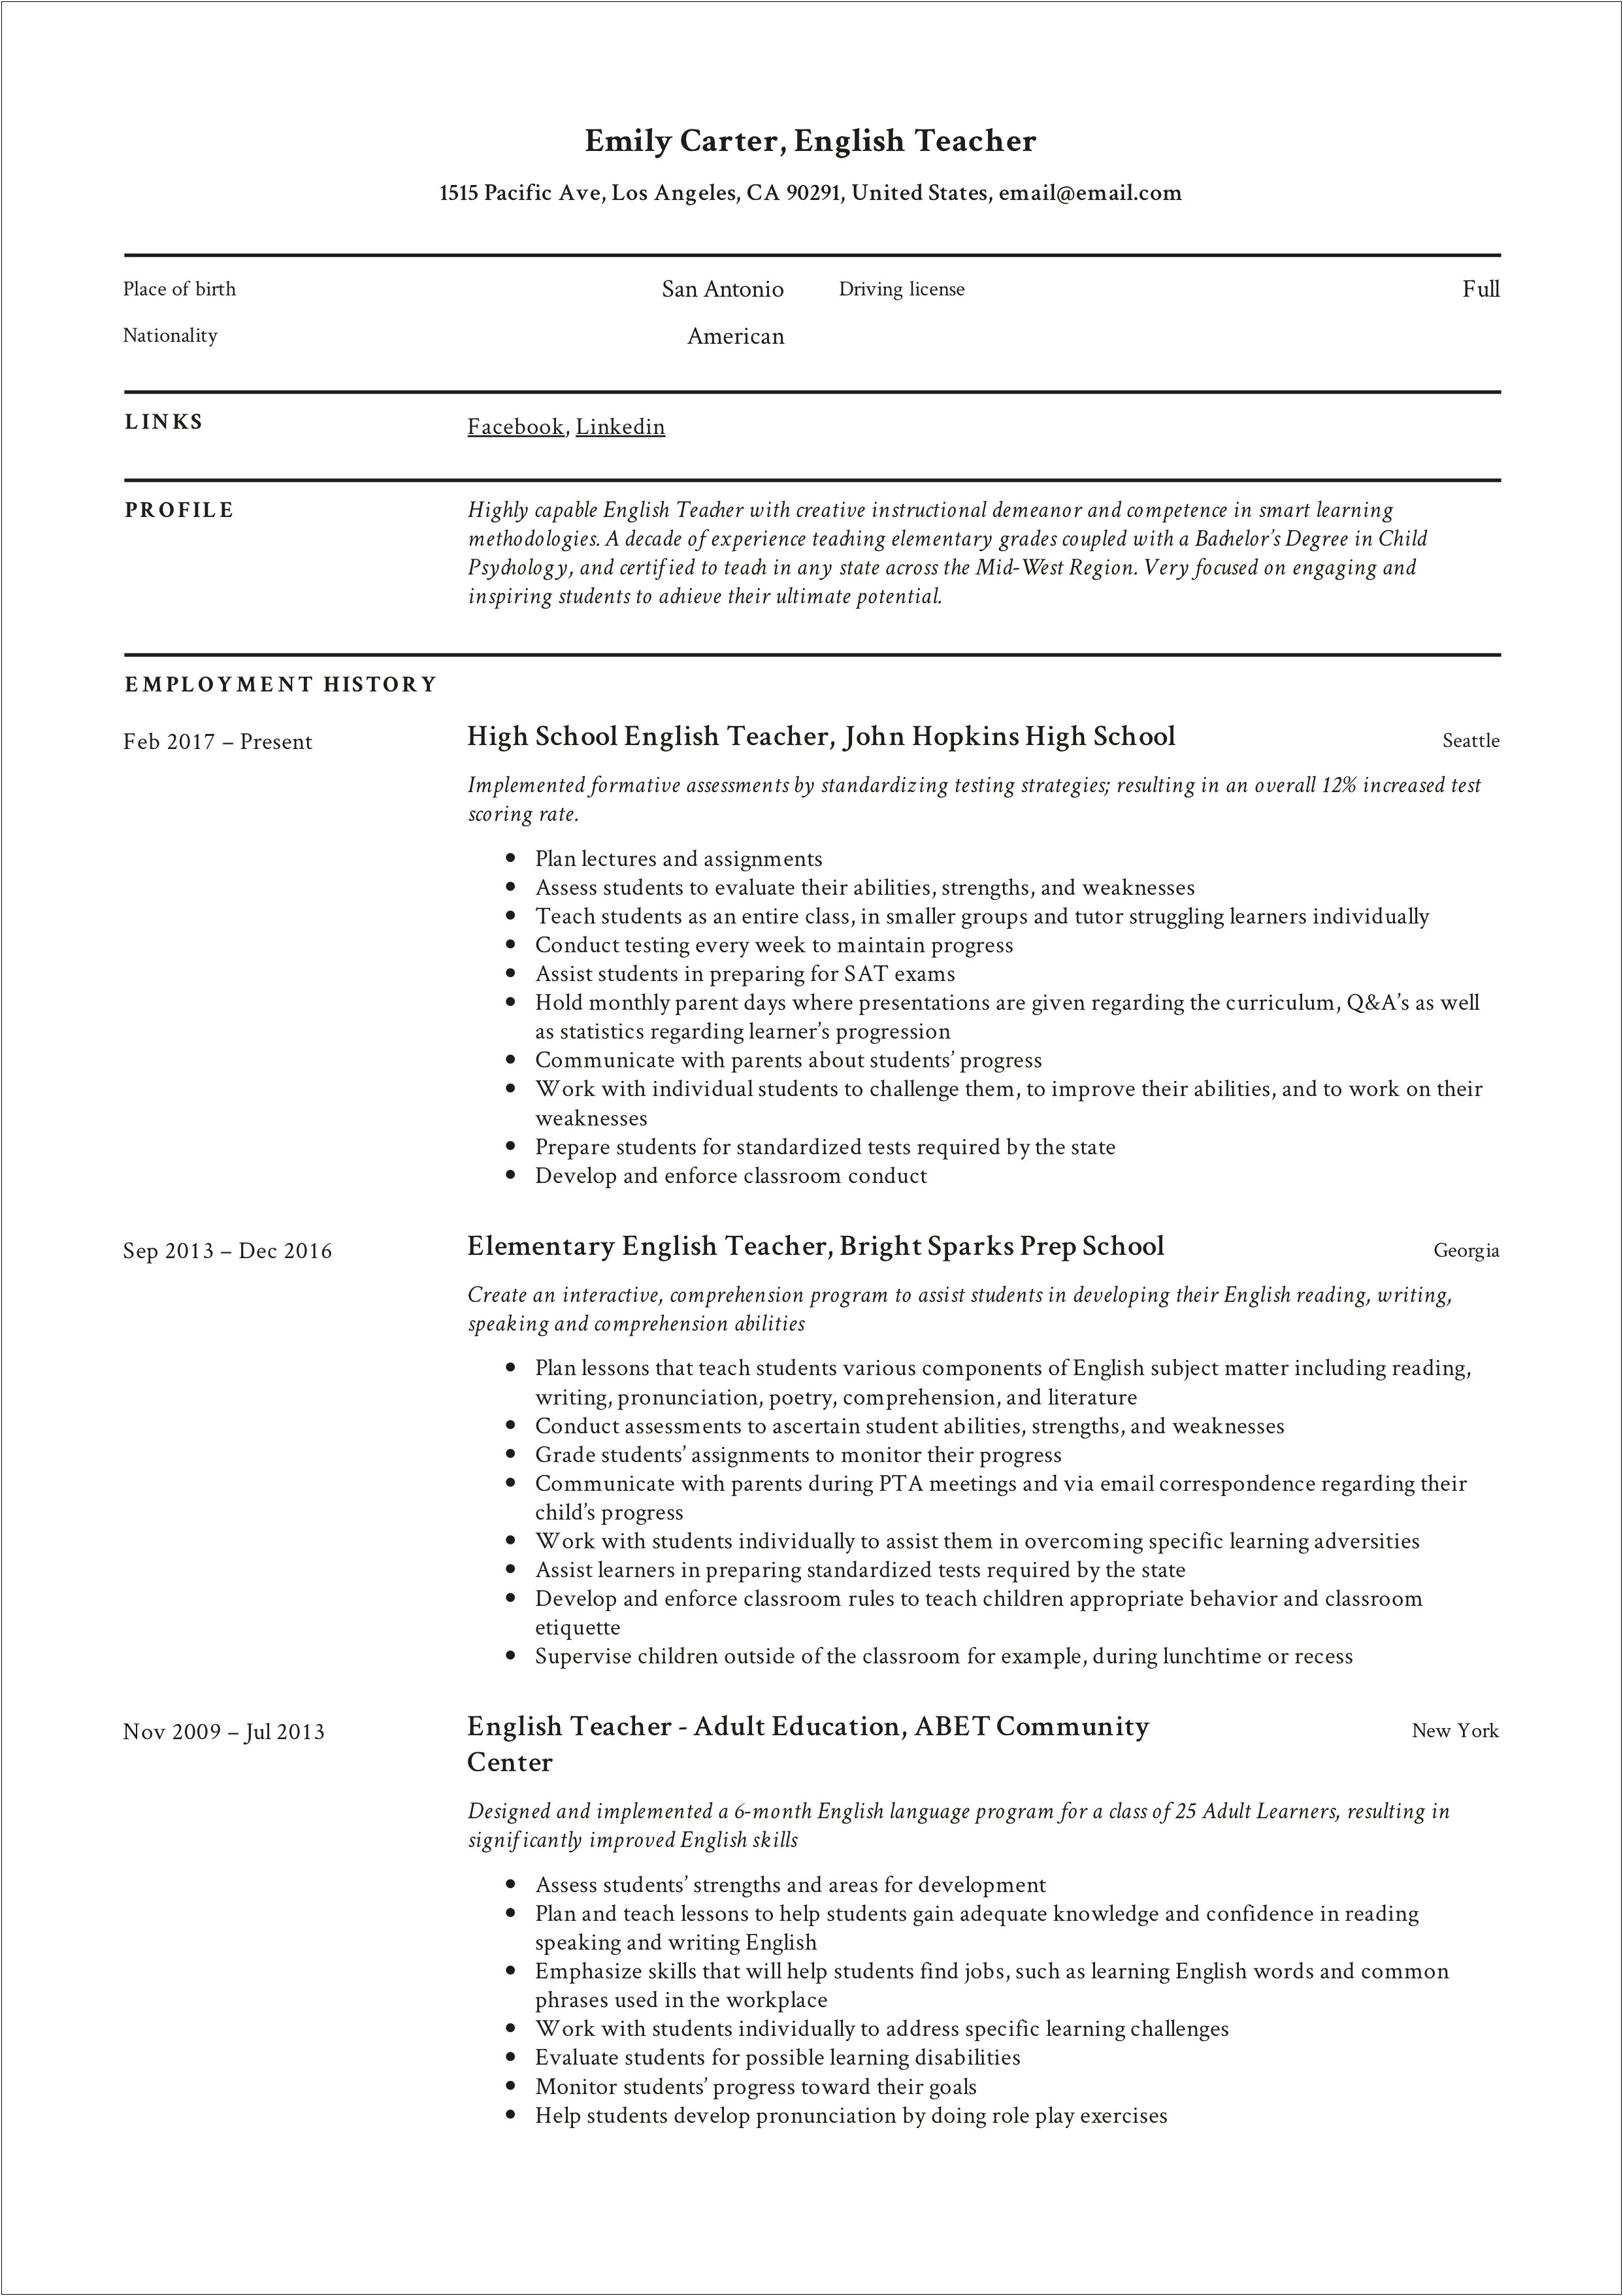 Explaining Resumes For High School Students